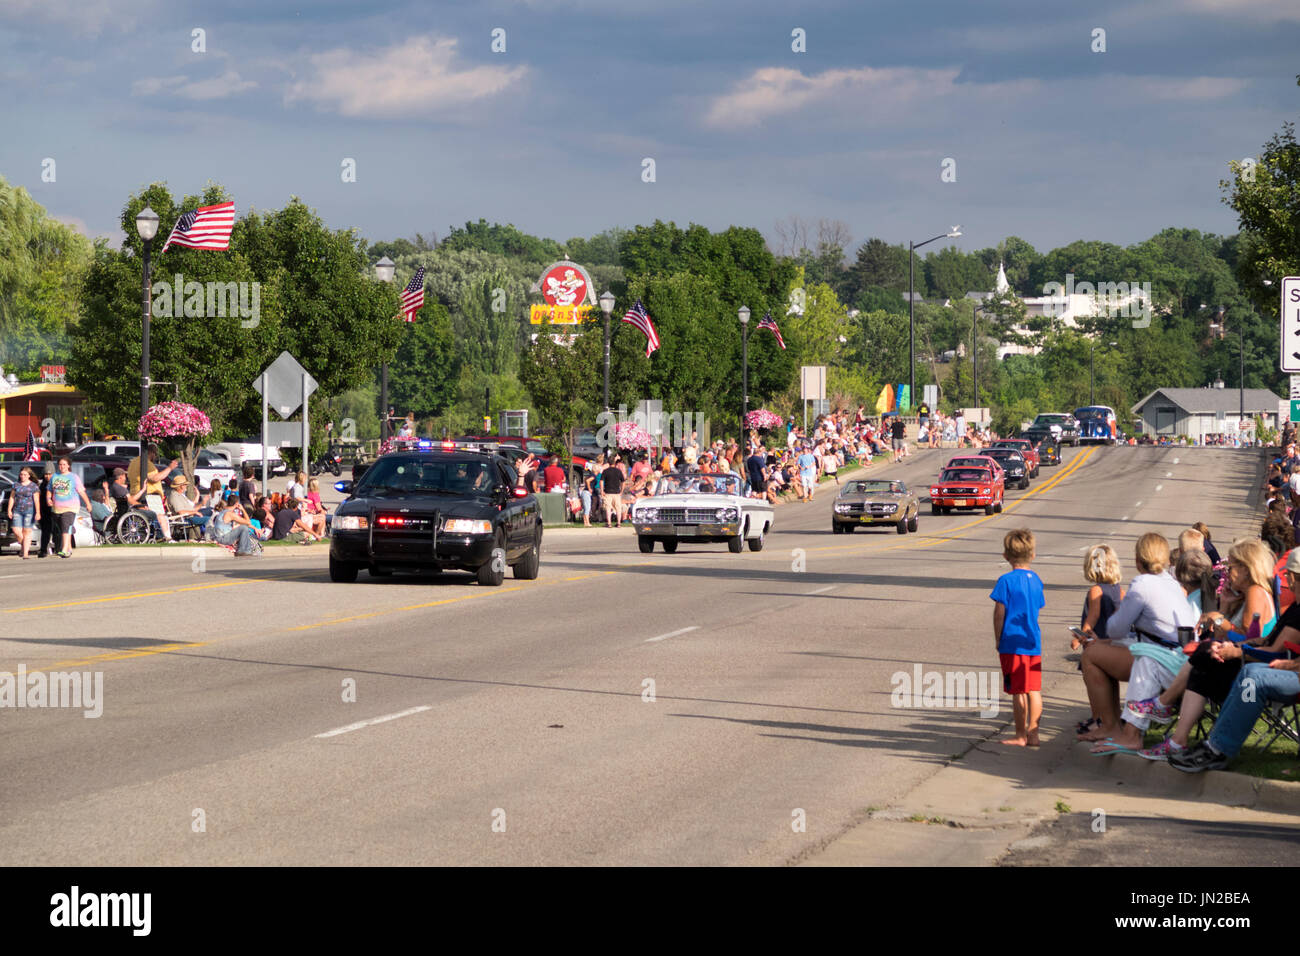 Beginning of the annual 'Cruz-In' antique car parade in downtown Montague, MI. Nearly 400 antique and vintage cars and trucks participated in this yea Stock Photo